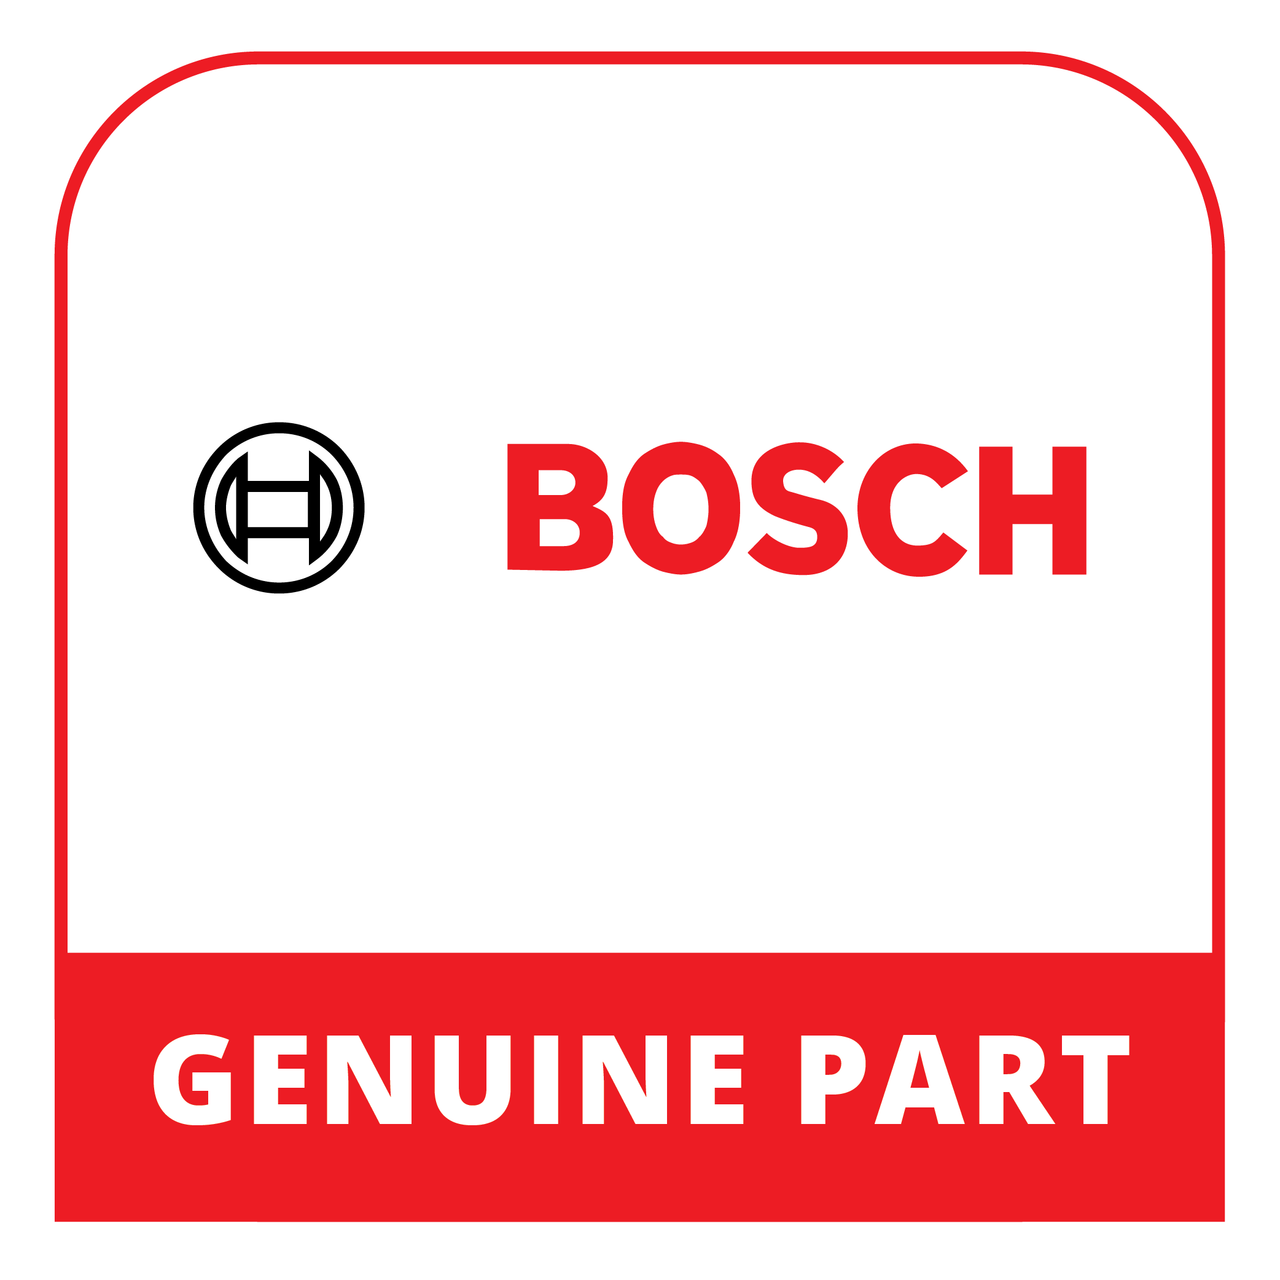 Bosch (Thermador) 12038908 - Holder - Genuine Bosch (Thermador) Part